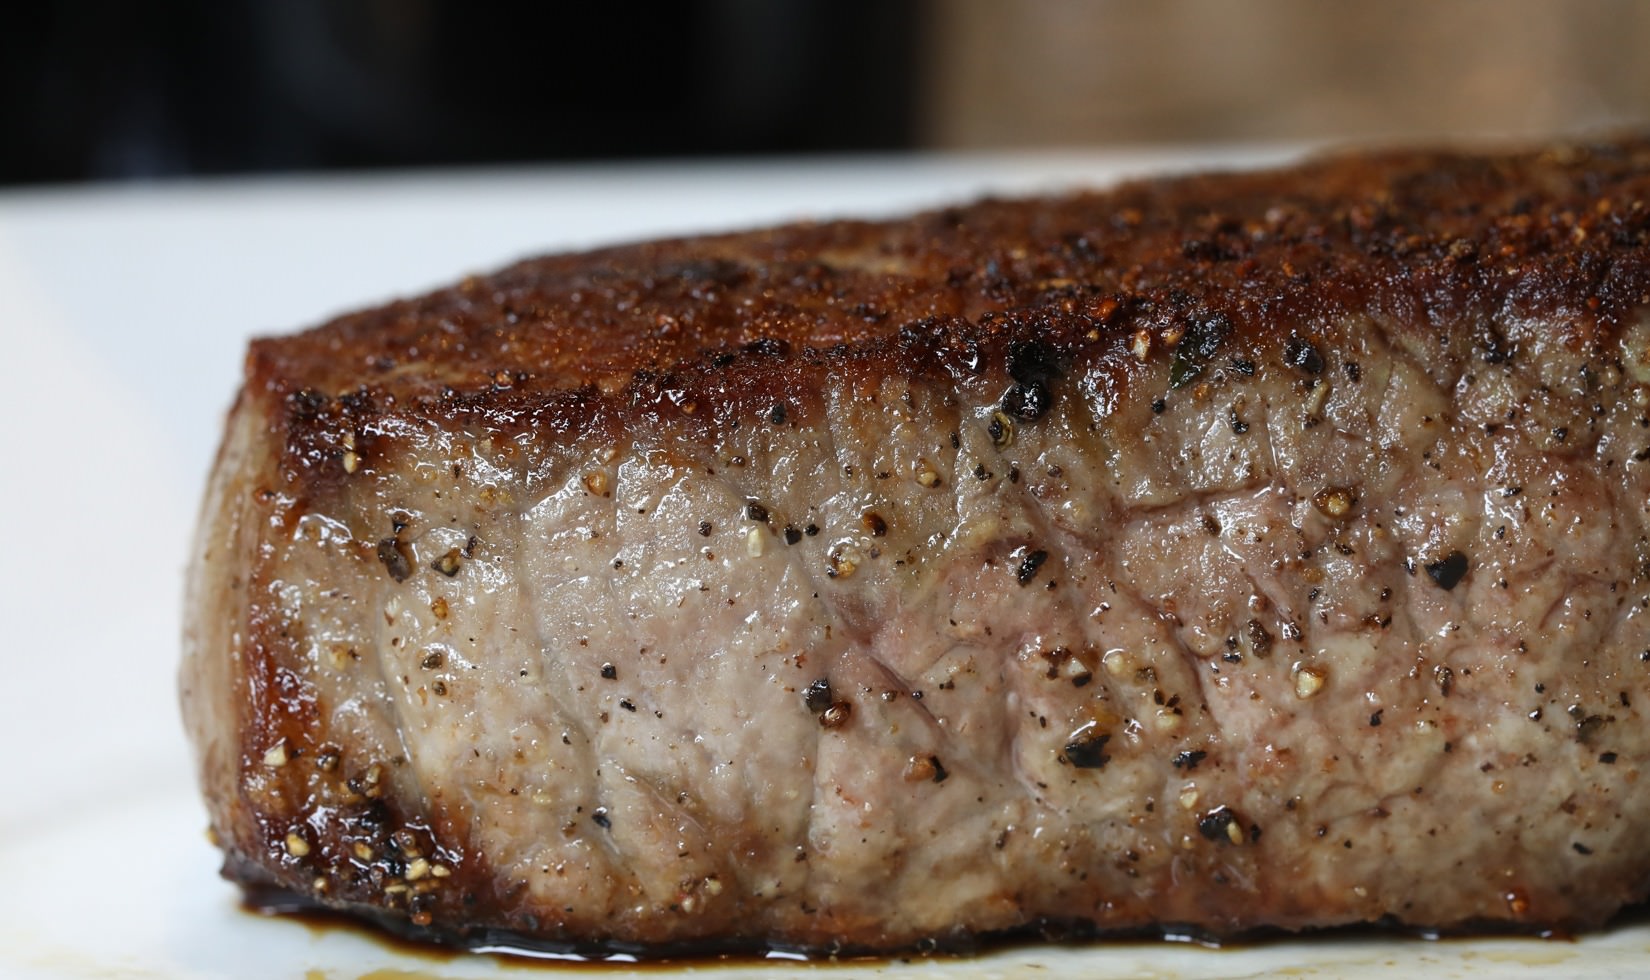 Grilled New York strip steak pairs well with Cabernet Sauvignon.